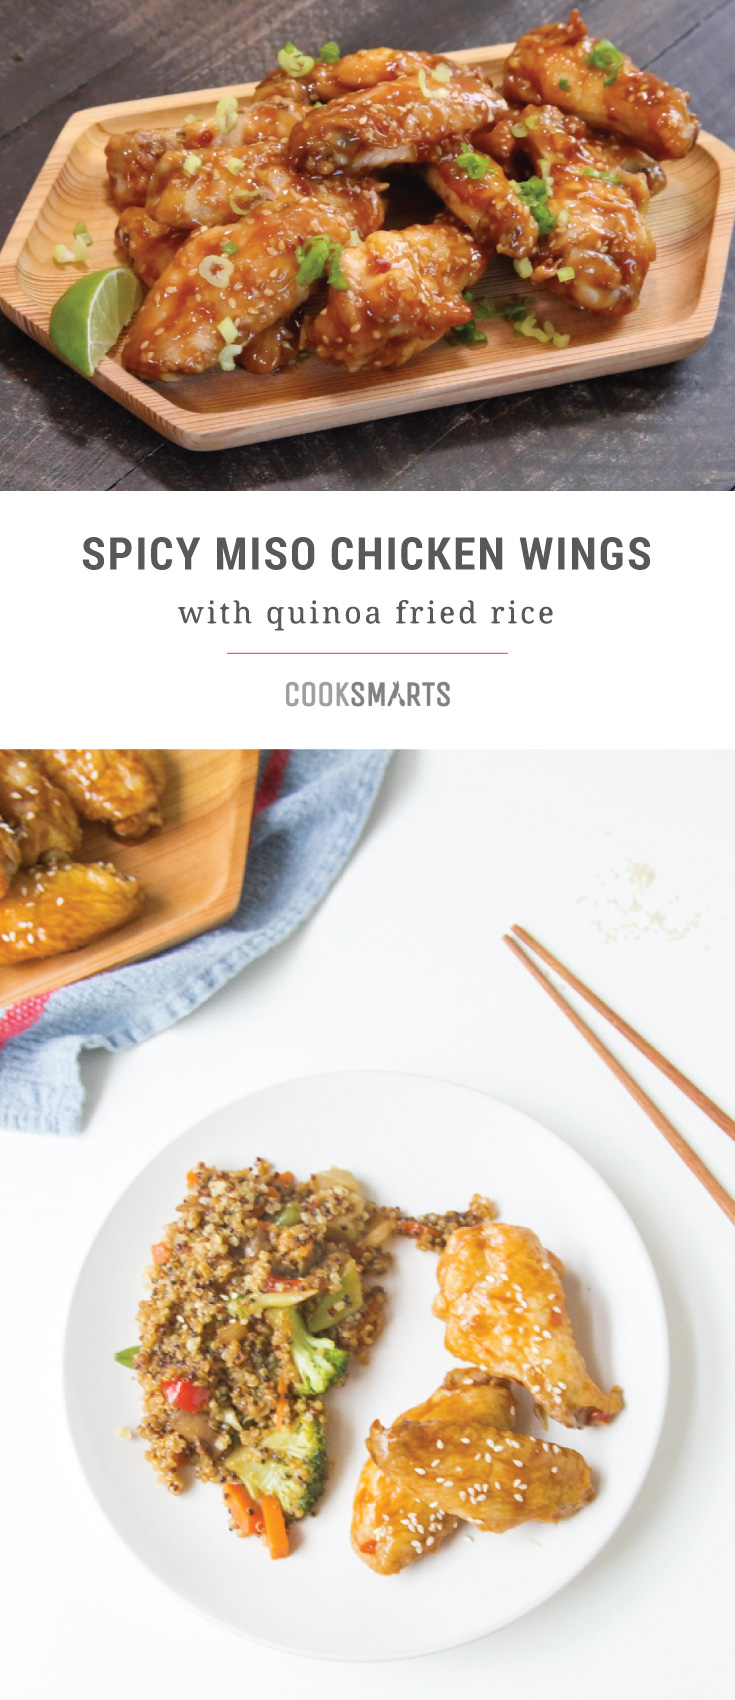 Weeknight Recipe: Spicy Miso Chicken Wings with Quinoa Fried Rice via @cooksmarts